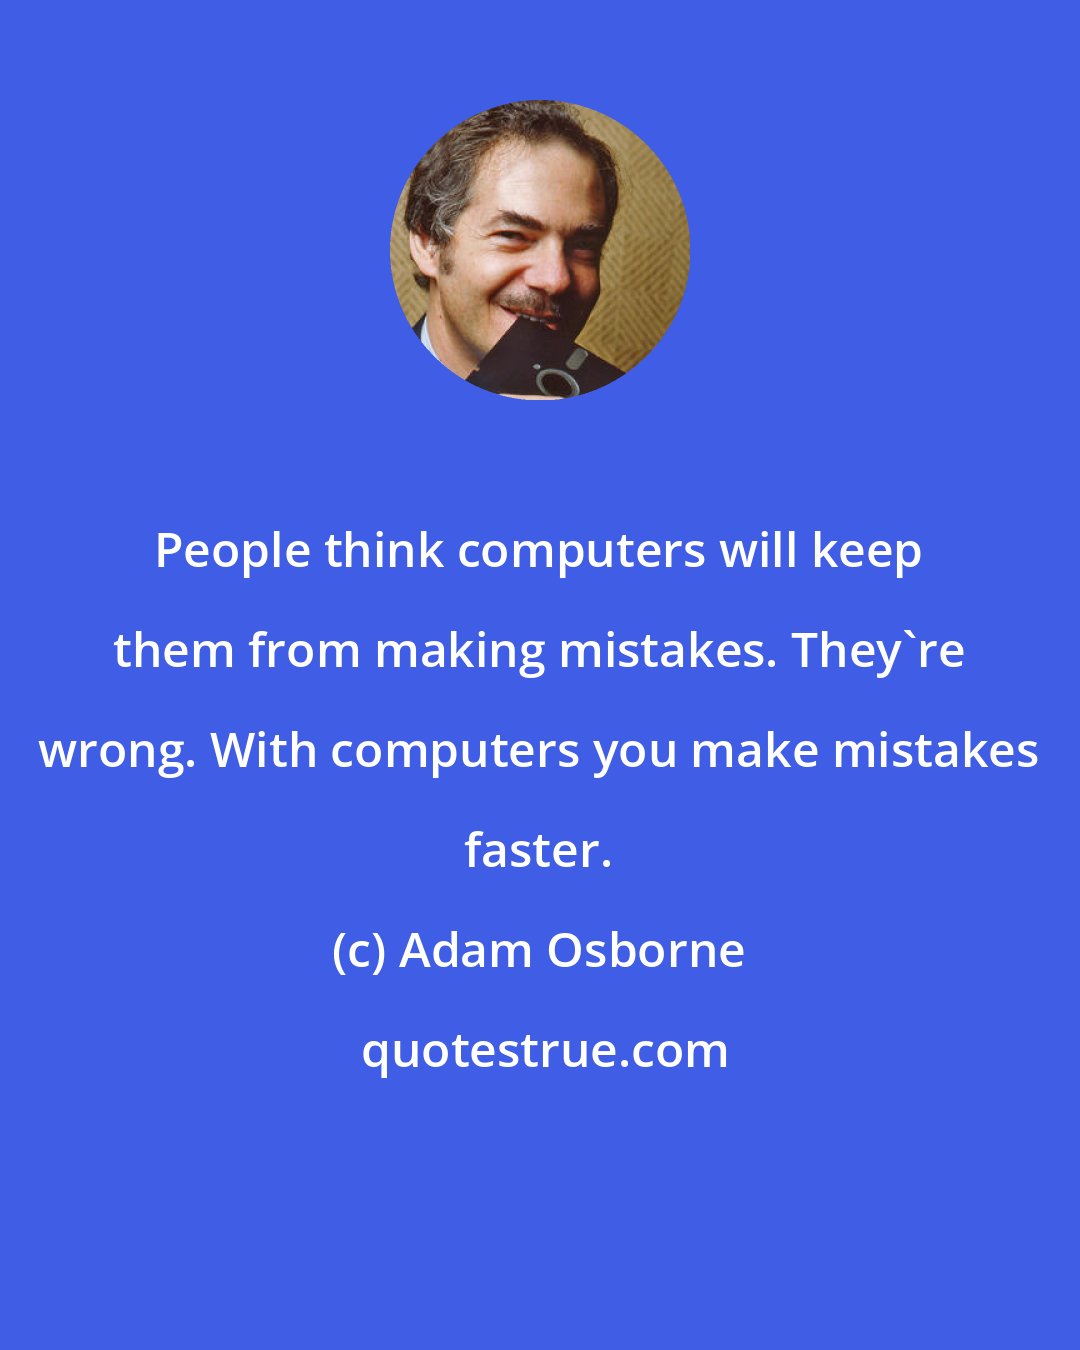 Adam Osborne: People think computers will keep them from making mistakes. They're wrong. With computers you make mistakes faster.